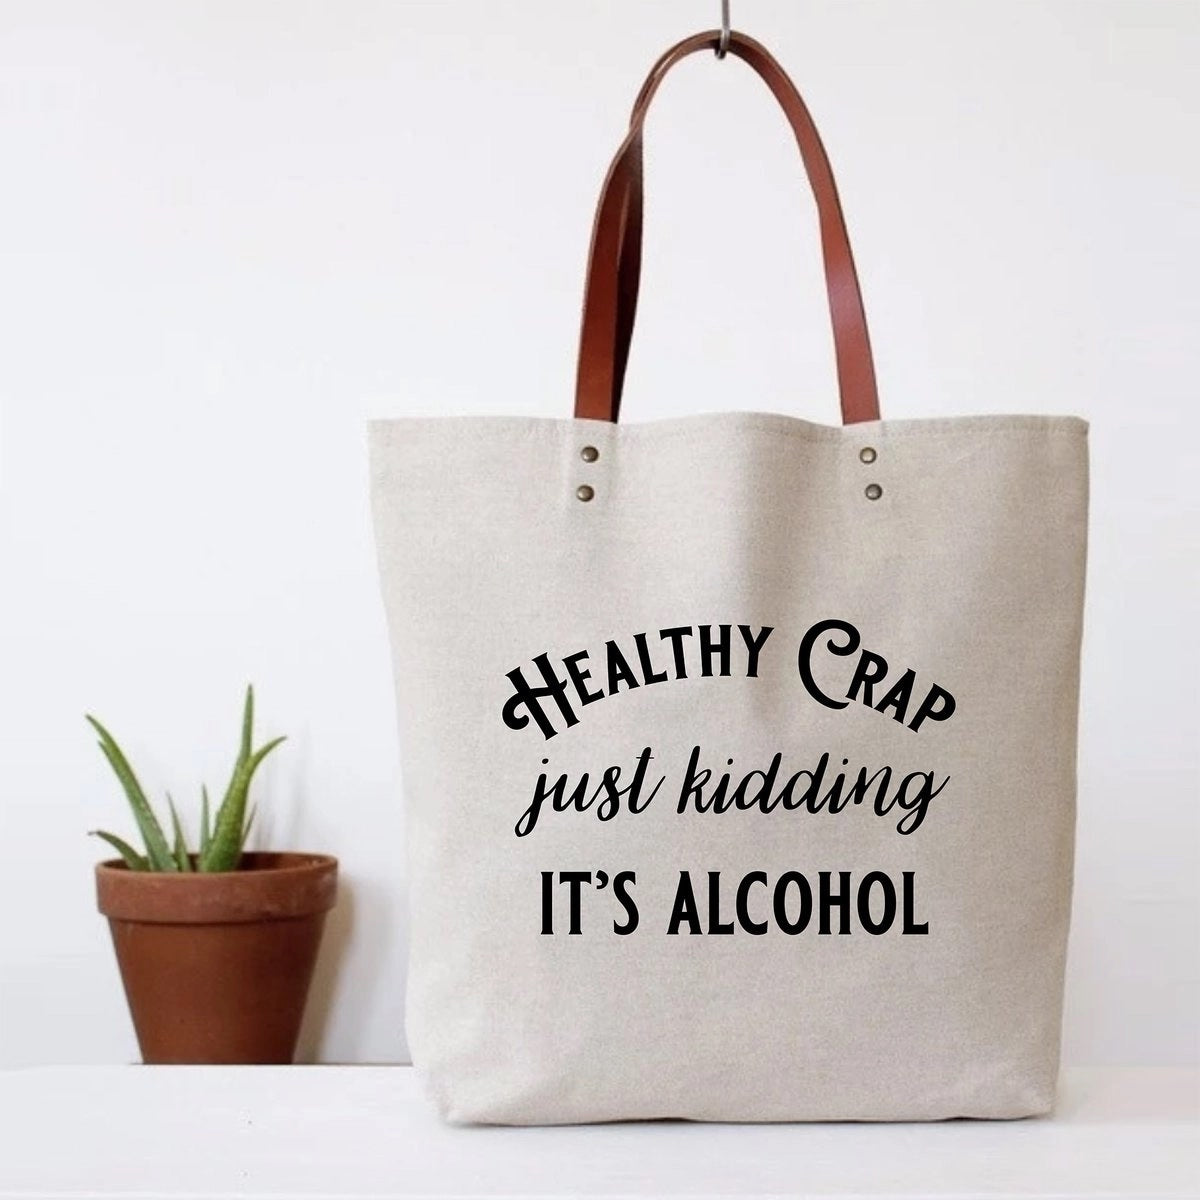 Canvas tote bag with faux leather straps that says "Healthy Crap Just kidding it's alcohol"